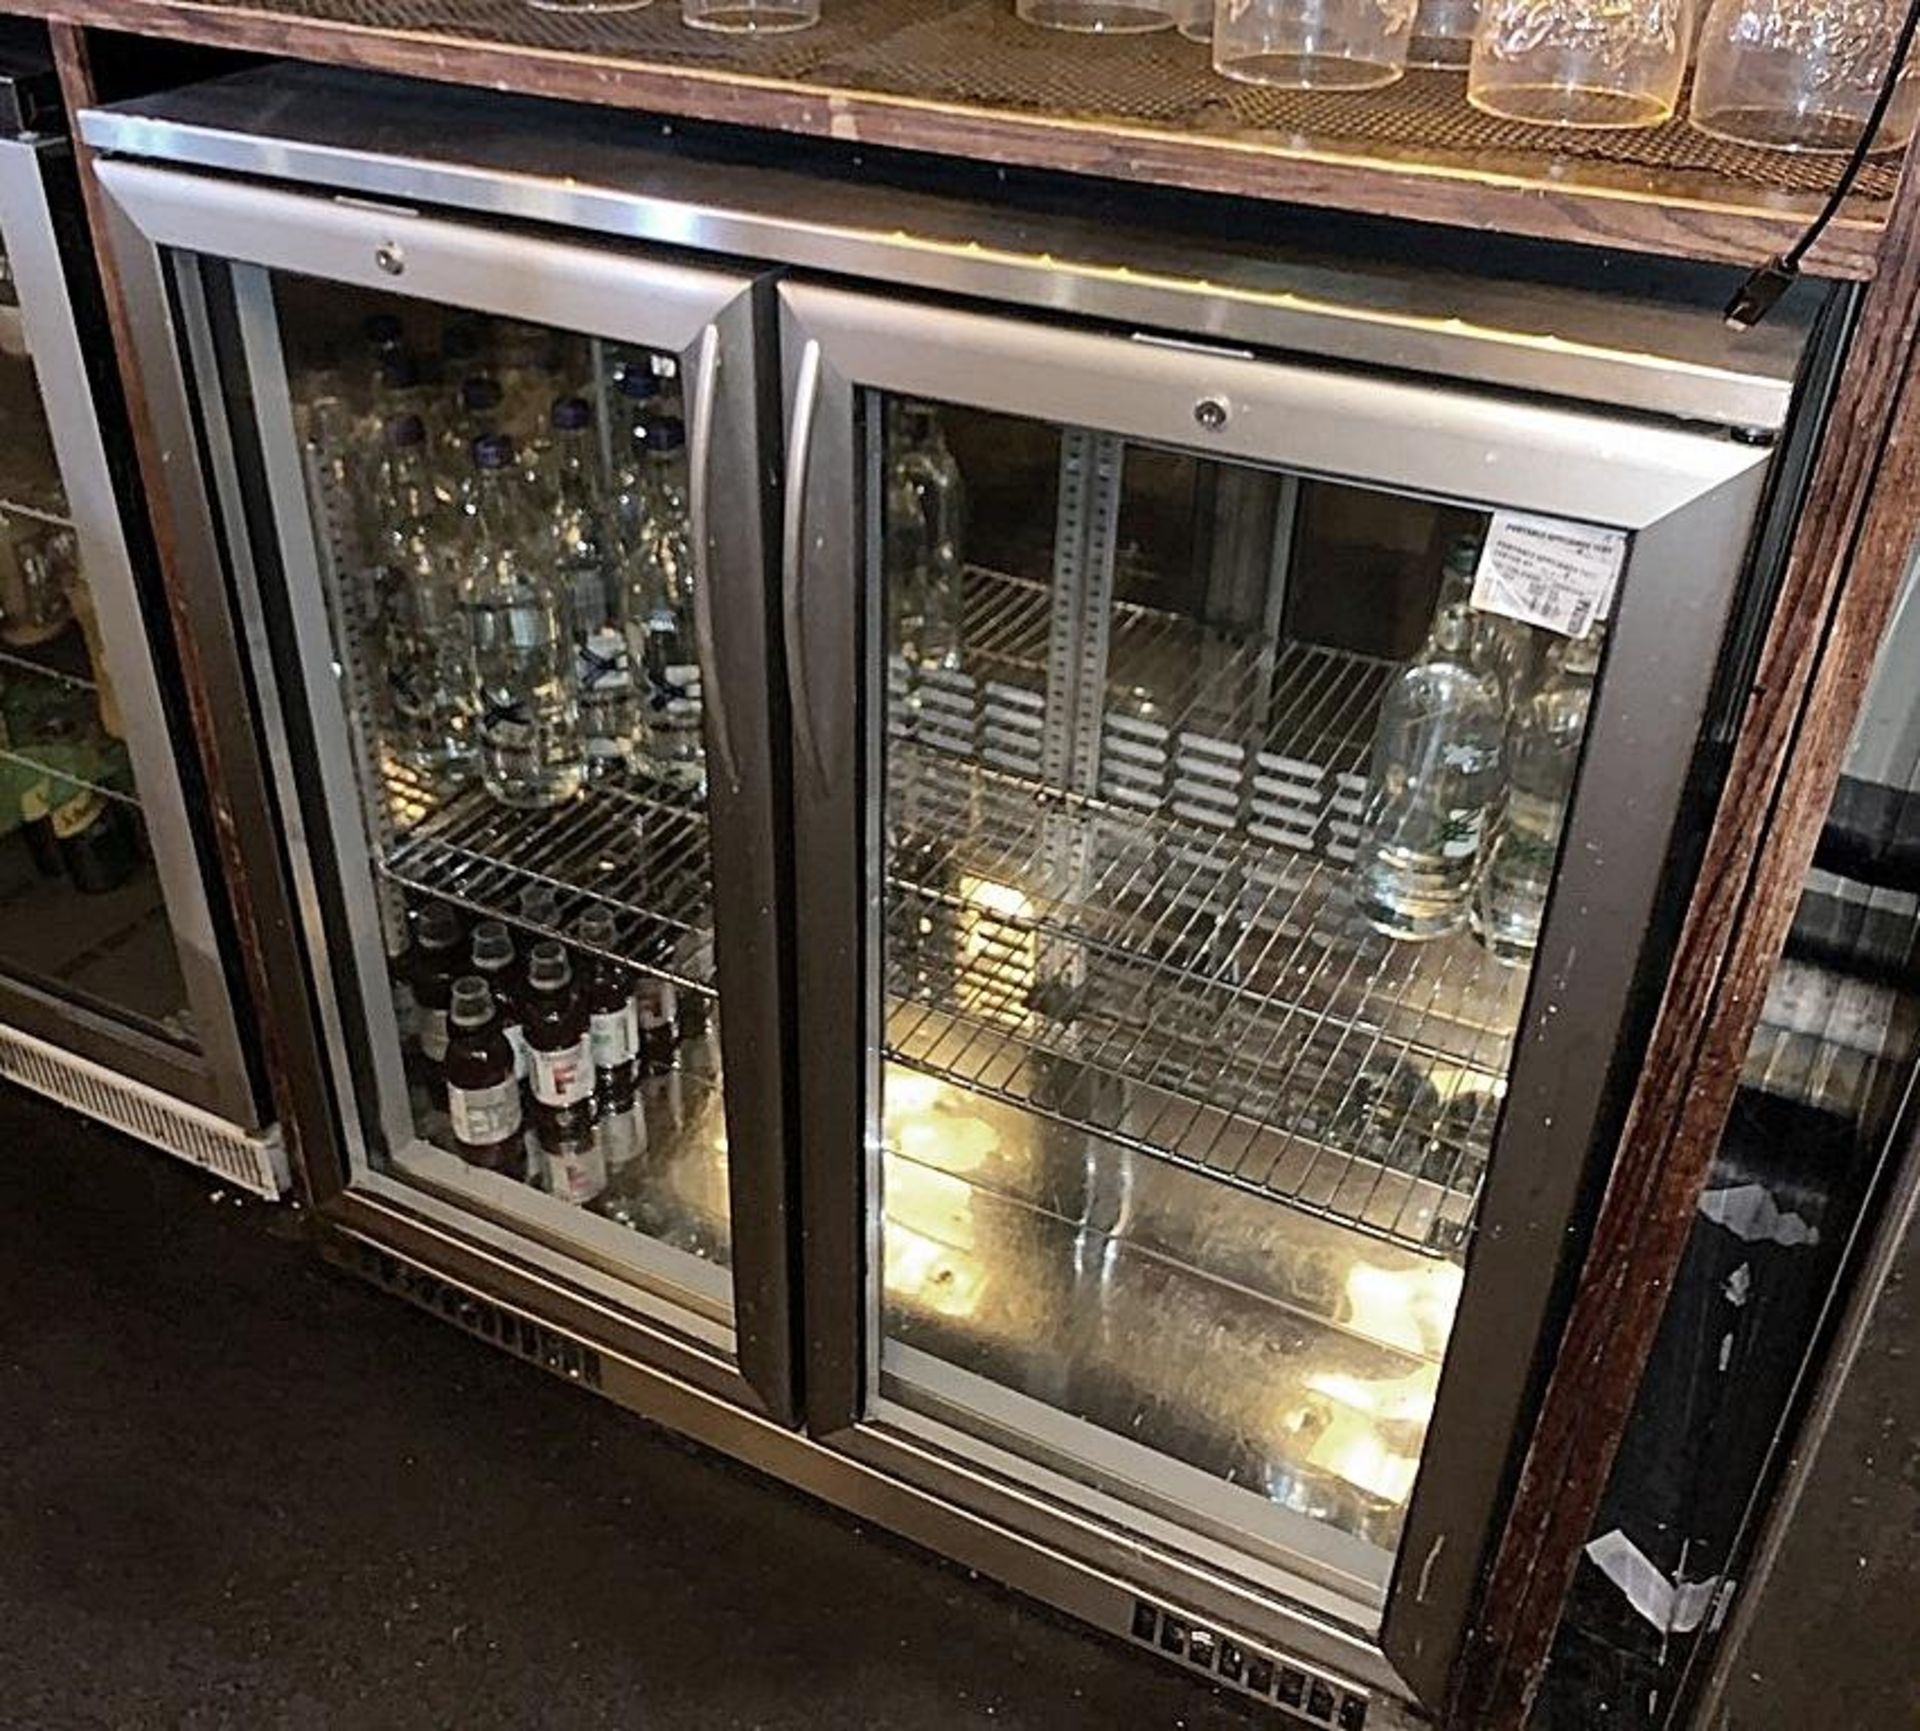 1 x Lec 9004 2-Door Back Bar Chiller With Stainless Steel Front - Dimensions: 90cm x 90cm - Ref: